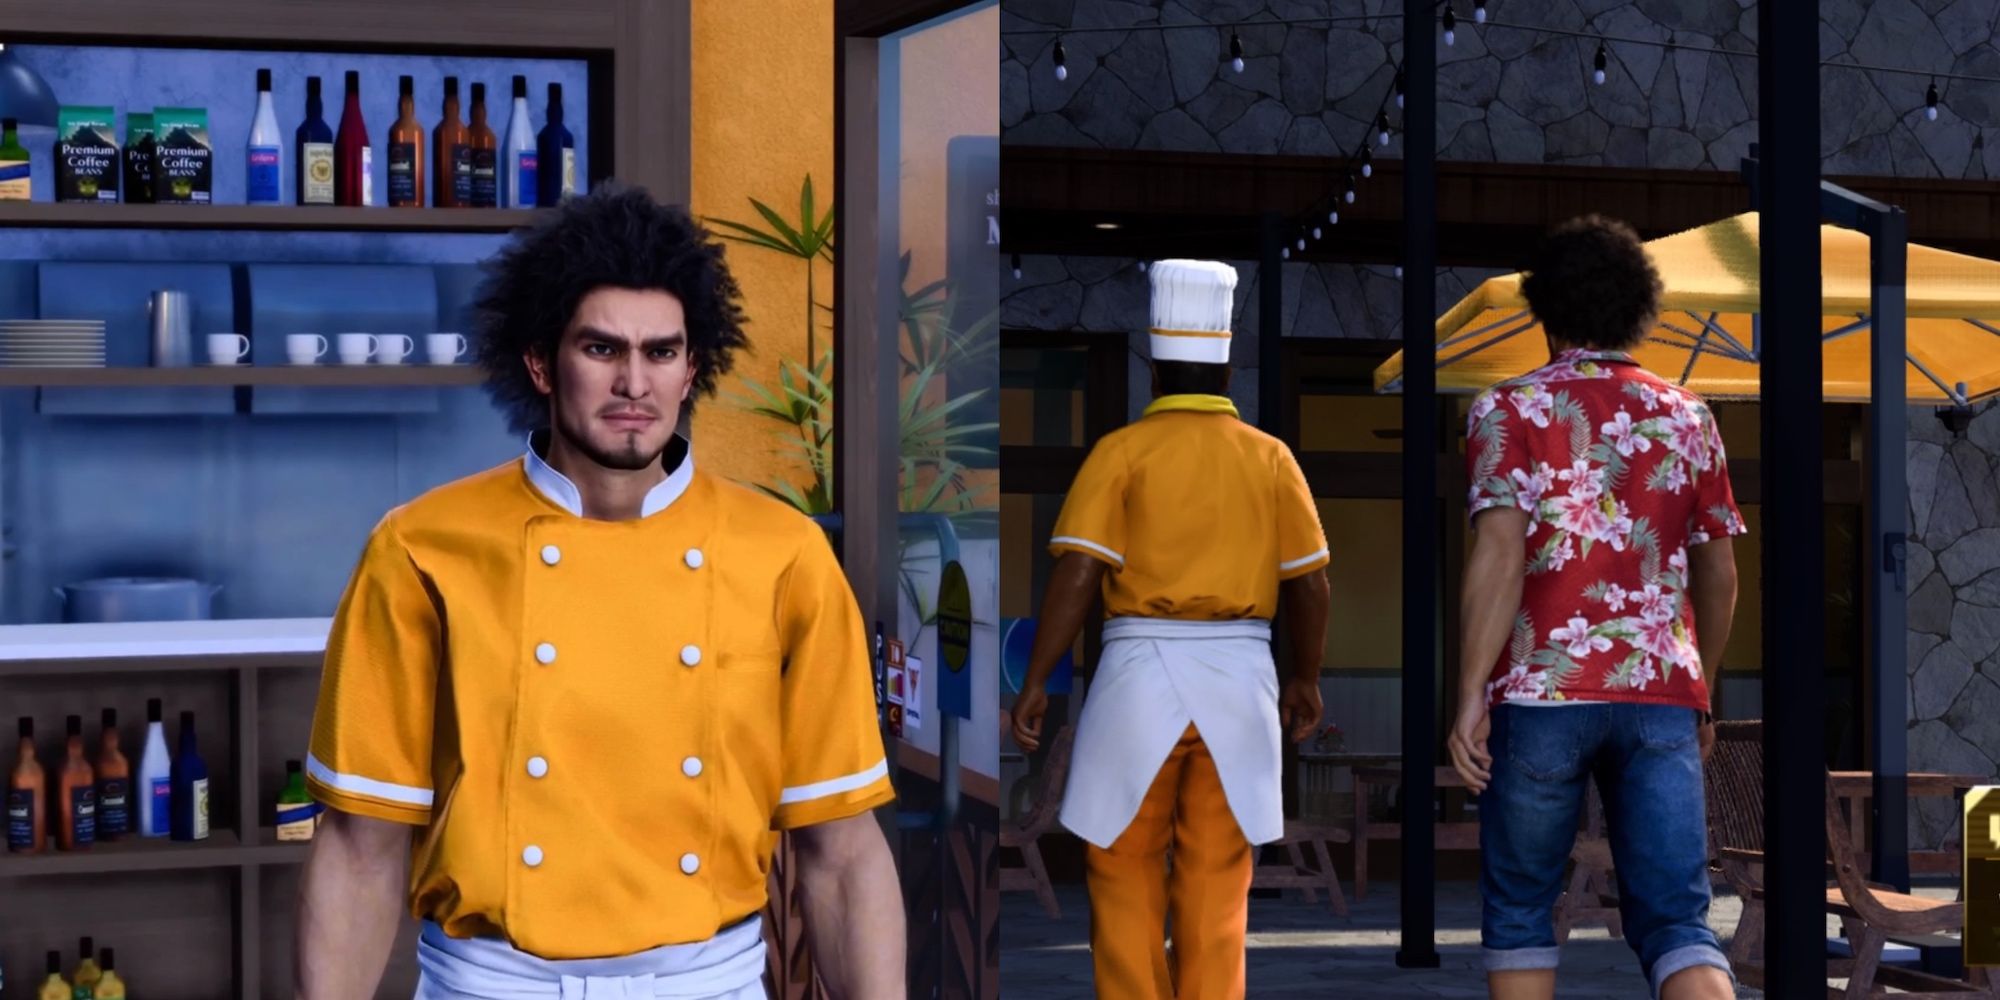 Ichiban in uniform on the left, Ichiban approaching chef on the right